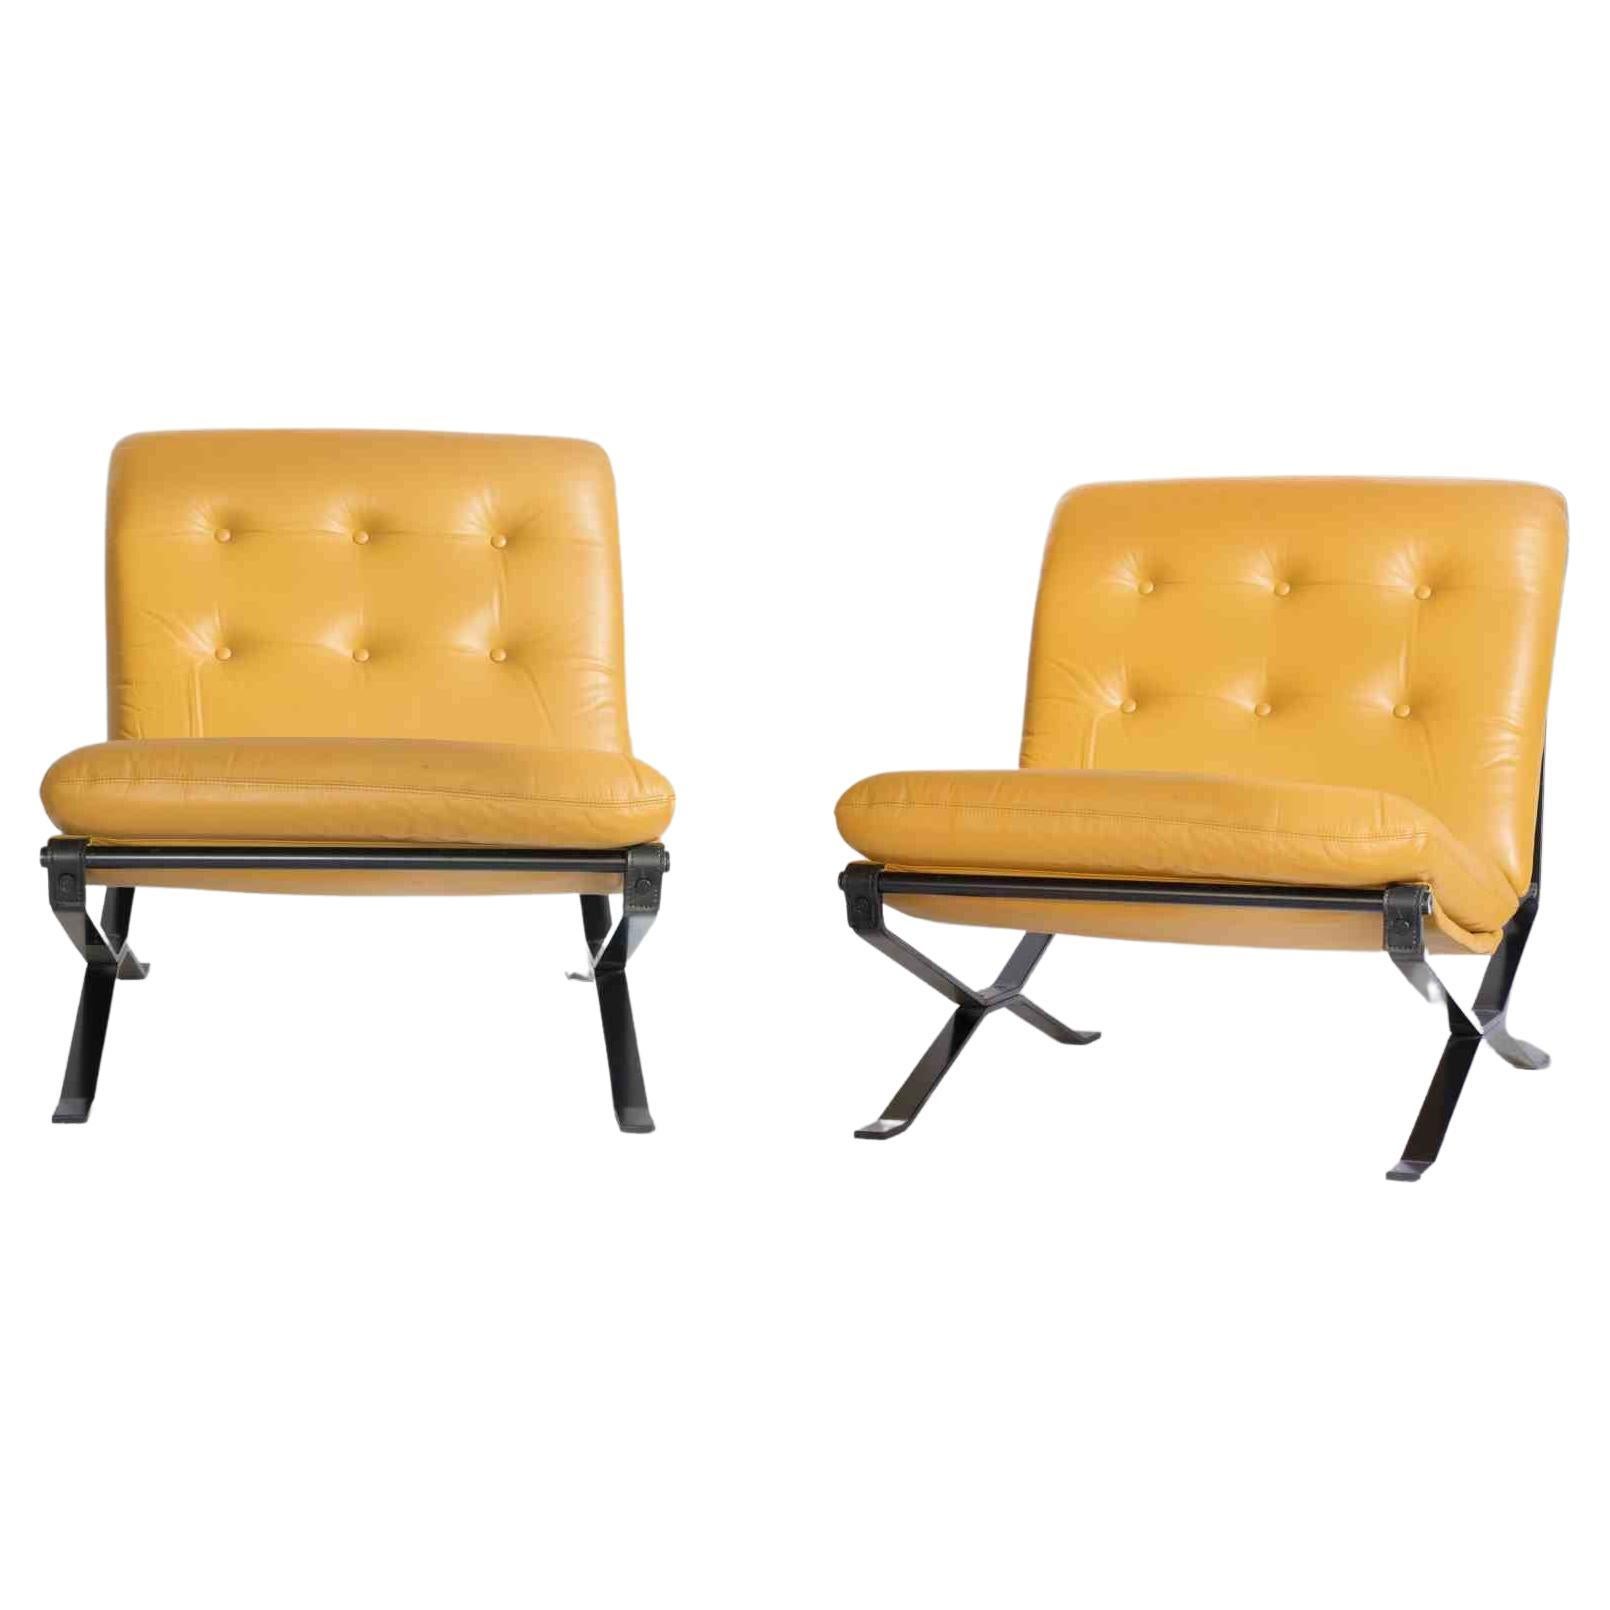 Pair of Lotus Armchair by Ico and Luisa Parisi, Mid-20th Century For Sale